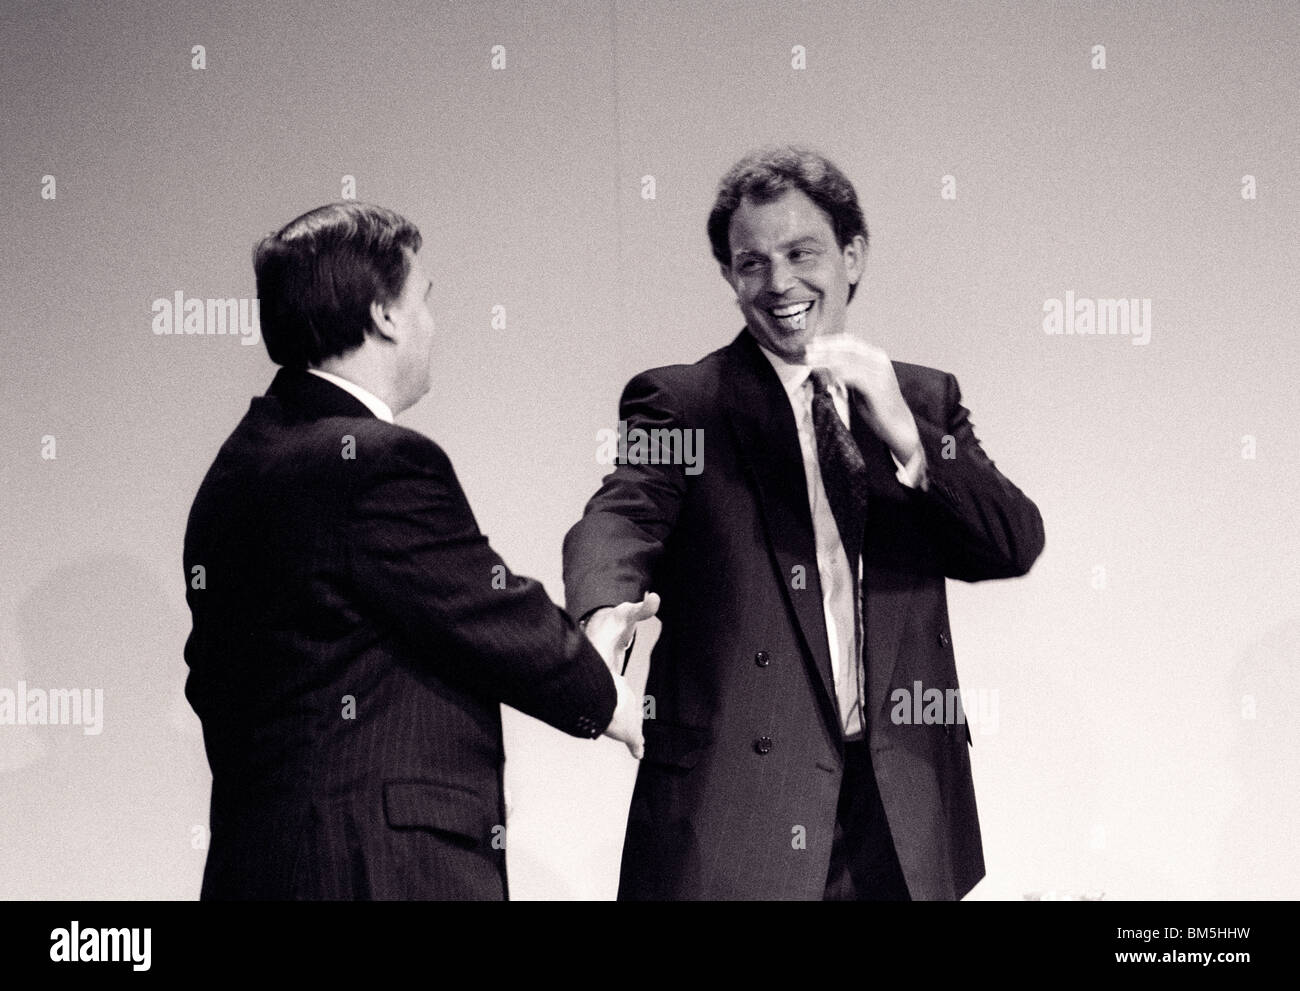 Tony Blair becomes Labour Party Leader and is congratulated by John Prescott who became deputy Prime Minister in 1997, London, Stock Photo